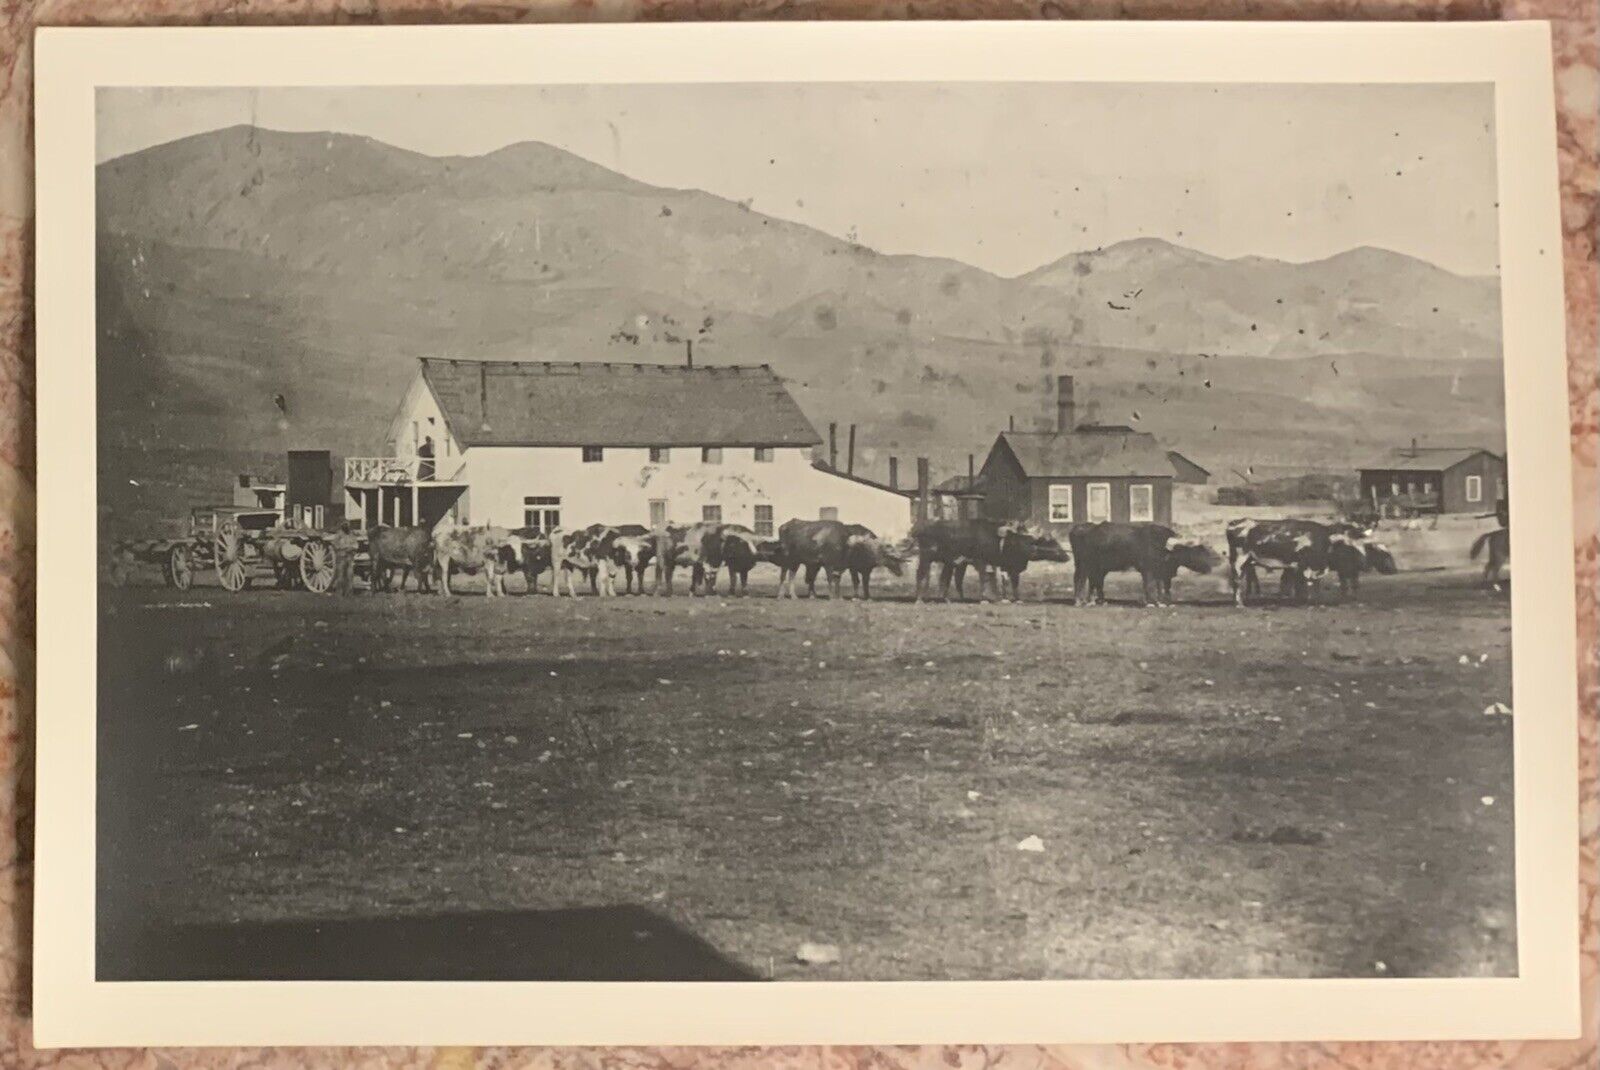 Candelaria Historic Nevada Cattle Train Mining Western Town 1880s Photograph